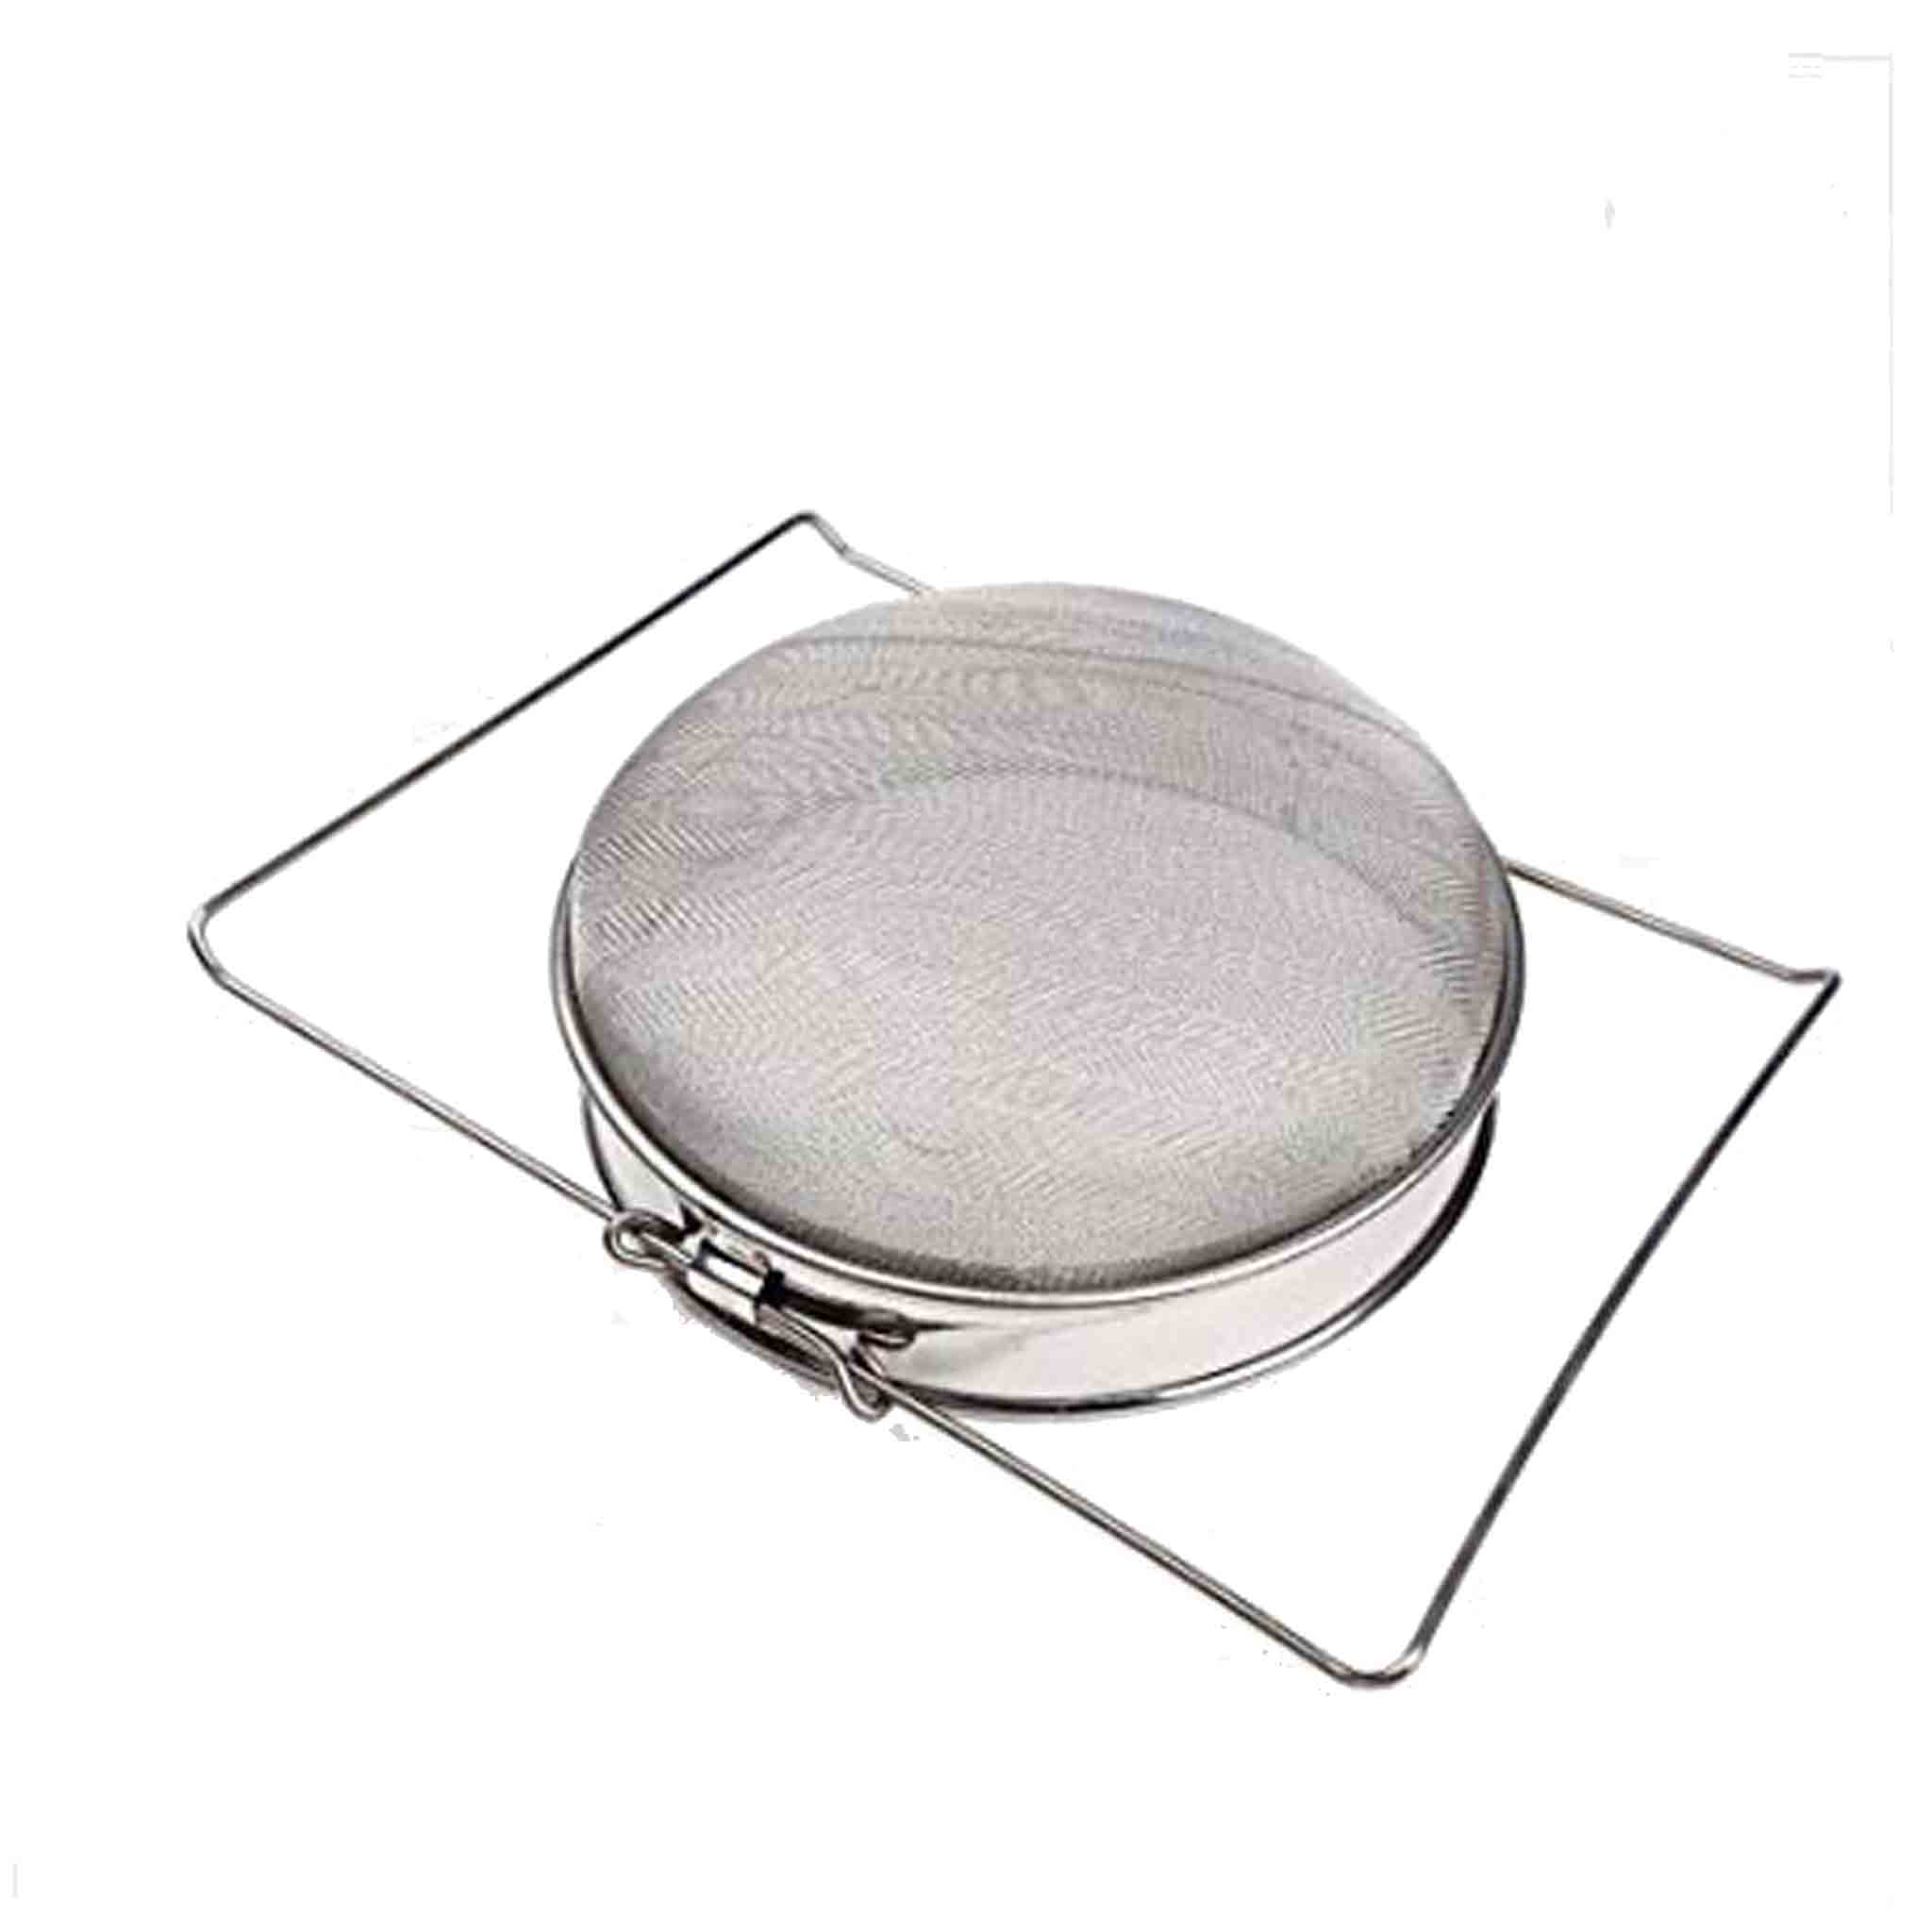 Honey Strainer Filter Stainless Steel with Double Strainer - Processing collection by Buzzbee Beekeeping Supplies